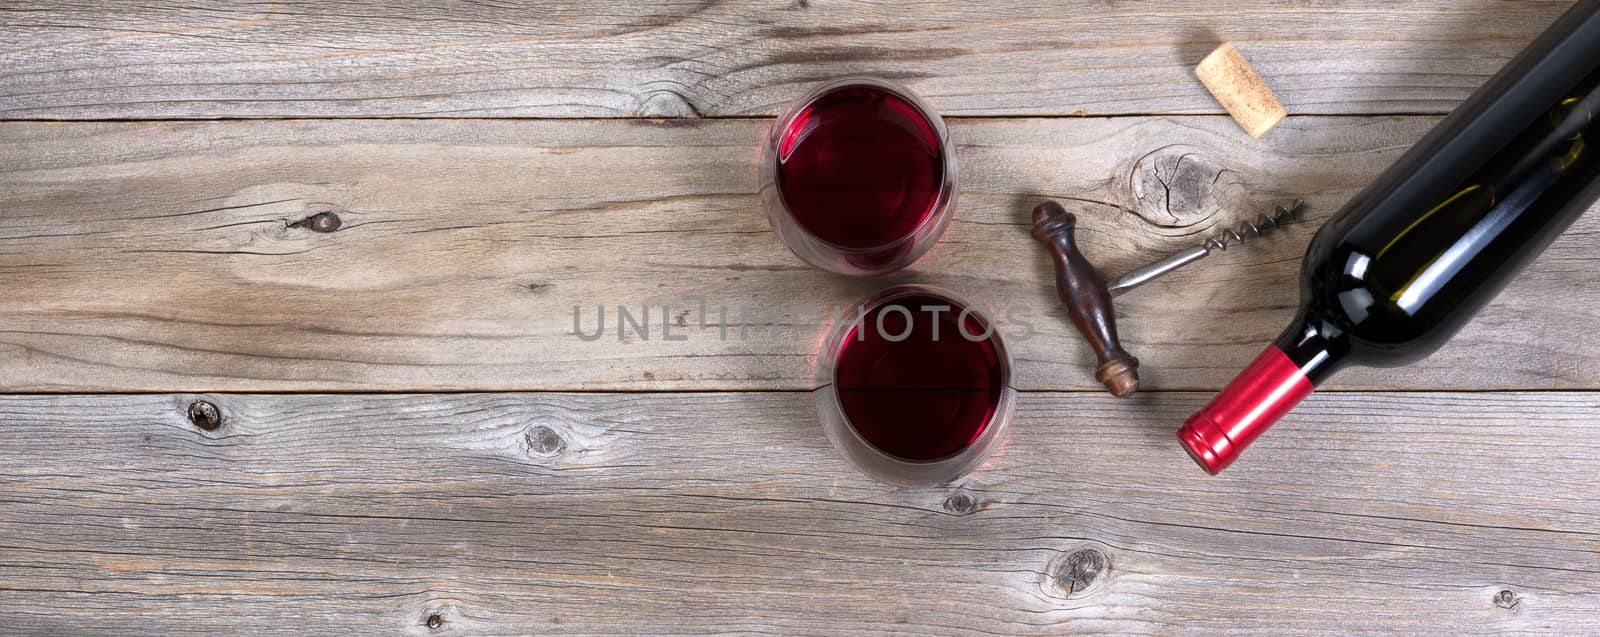 Flat view of a bottle of red wine, antique corkscrew, and full drinking glasses on rustic wooden boards